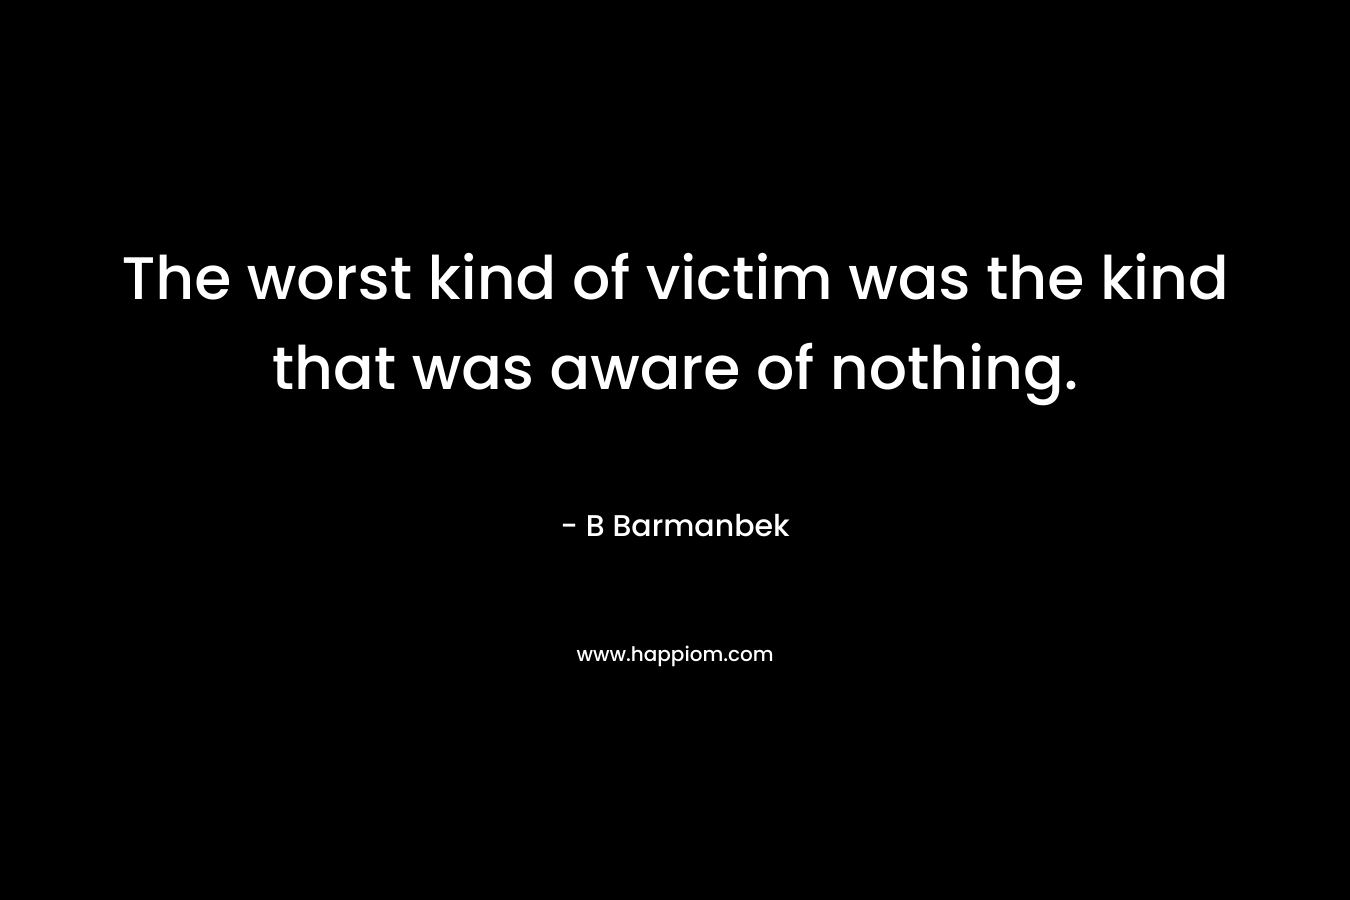 The worst kind of victim was the kind that was aware of nothing. – B Barmanbek